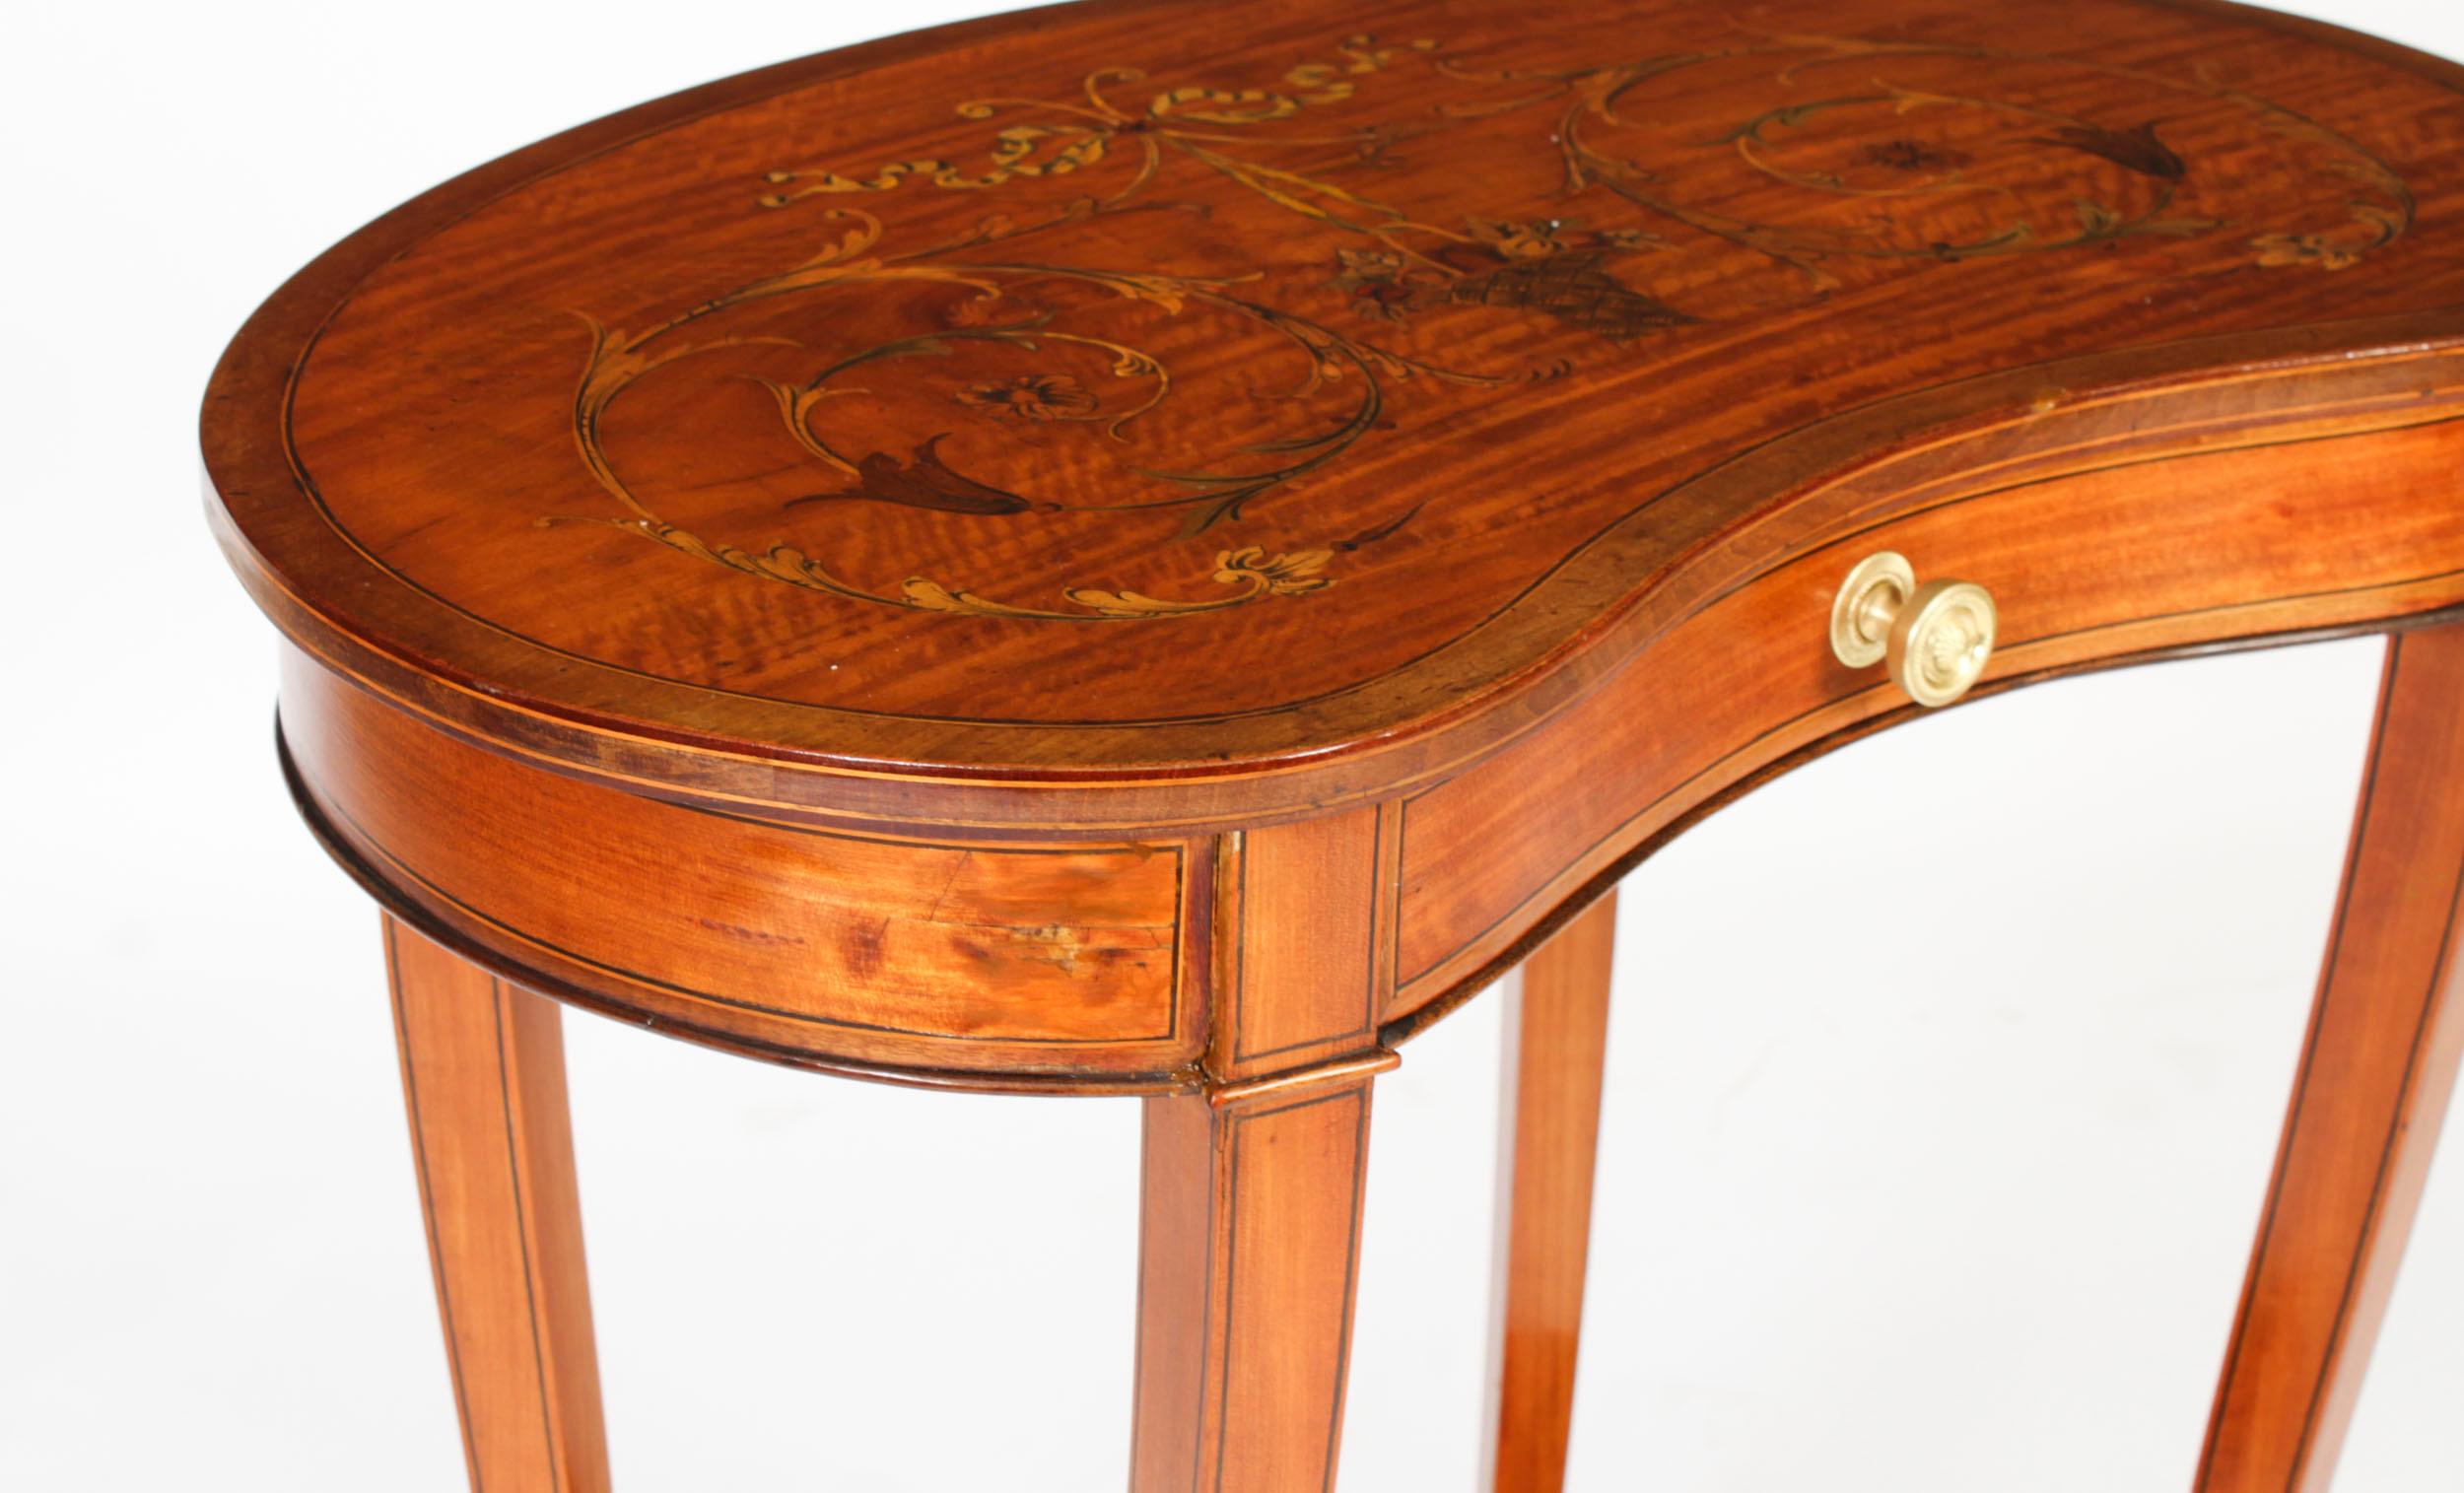 Antique English Marquetry Kidney Shaped Occasionally Tables 19th Century For Sale 7